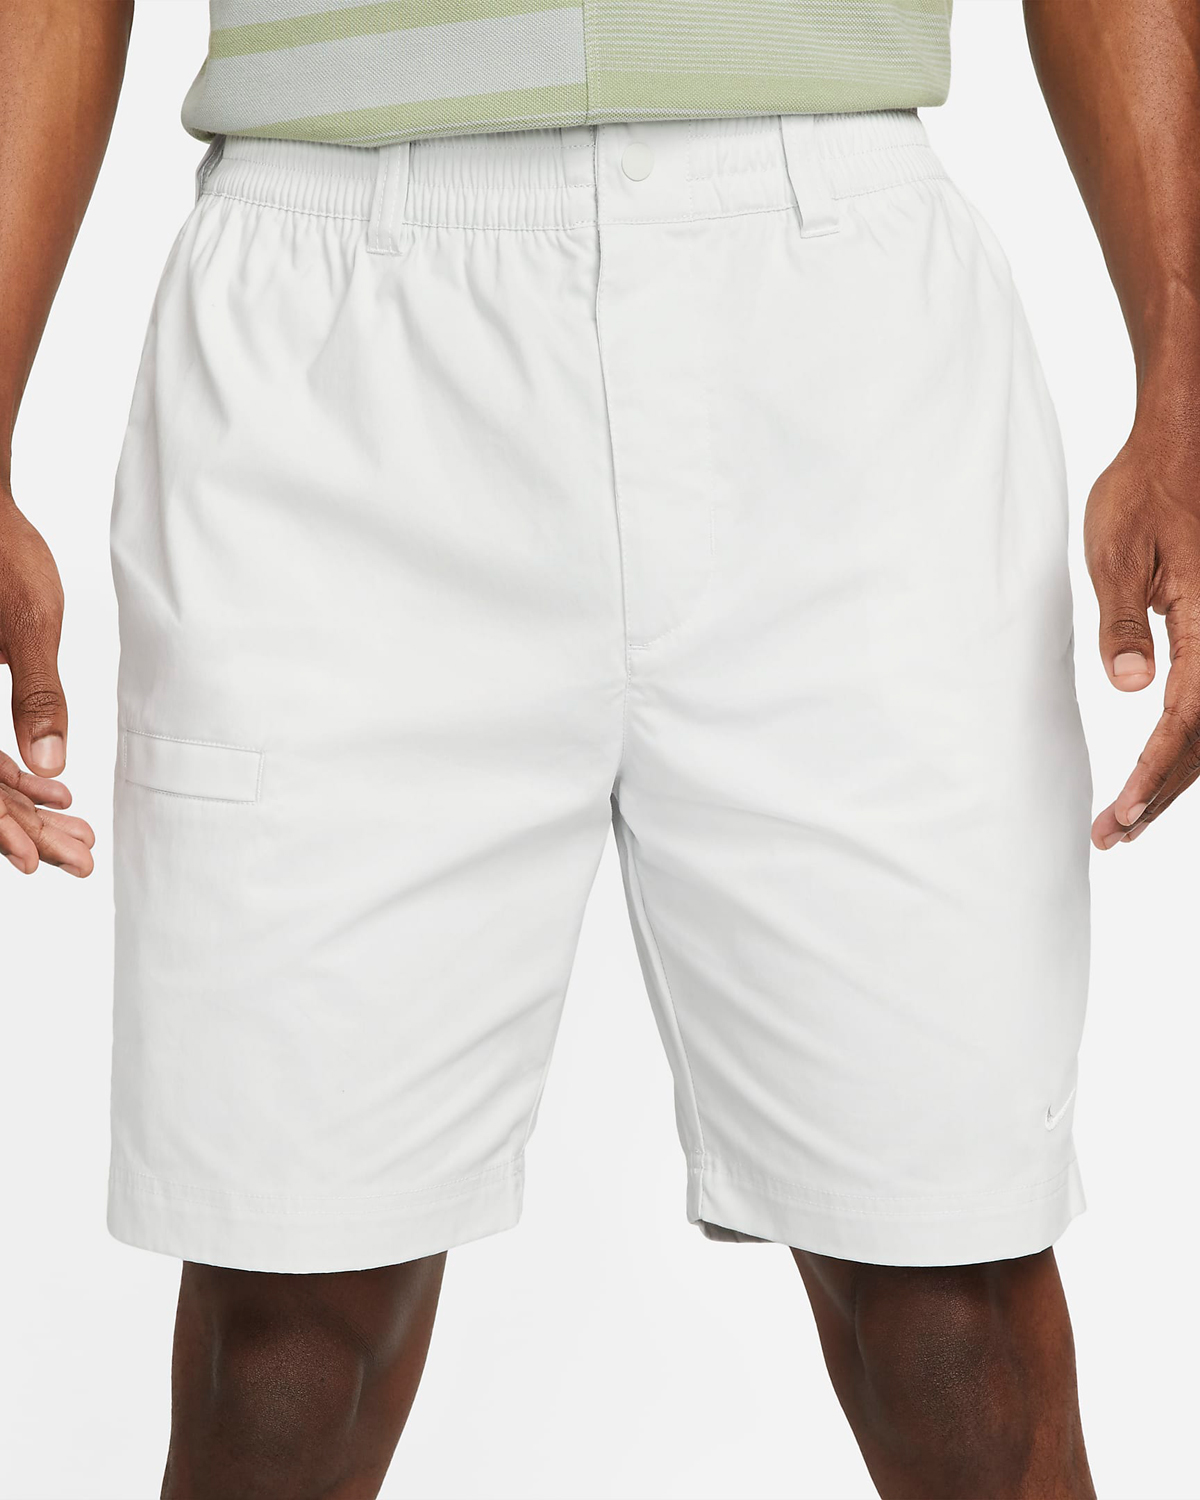 Nike-Unscripted-Golf-Shorts-White-2